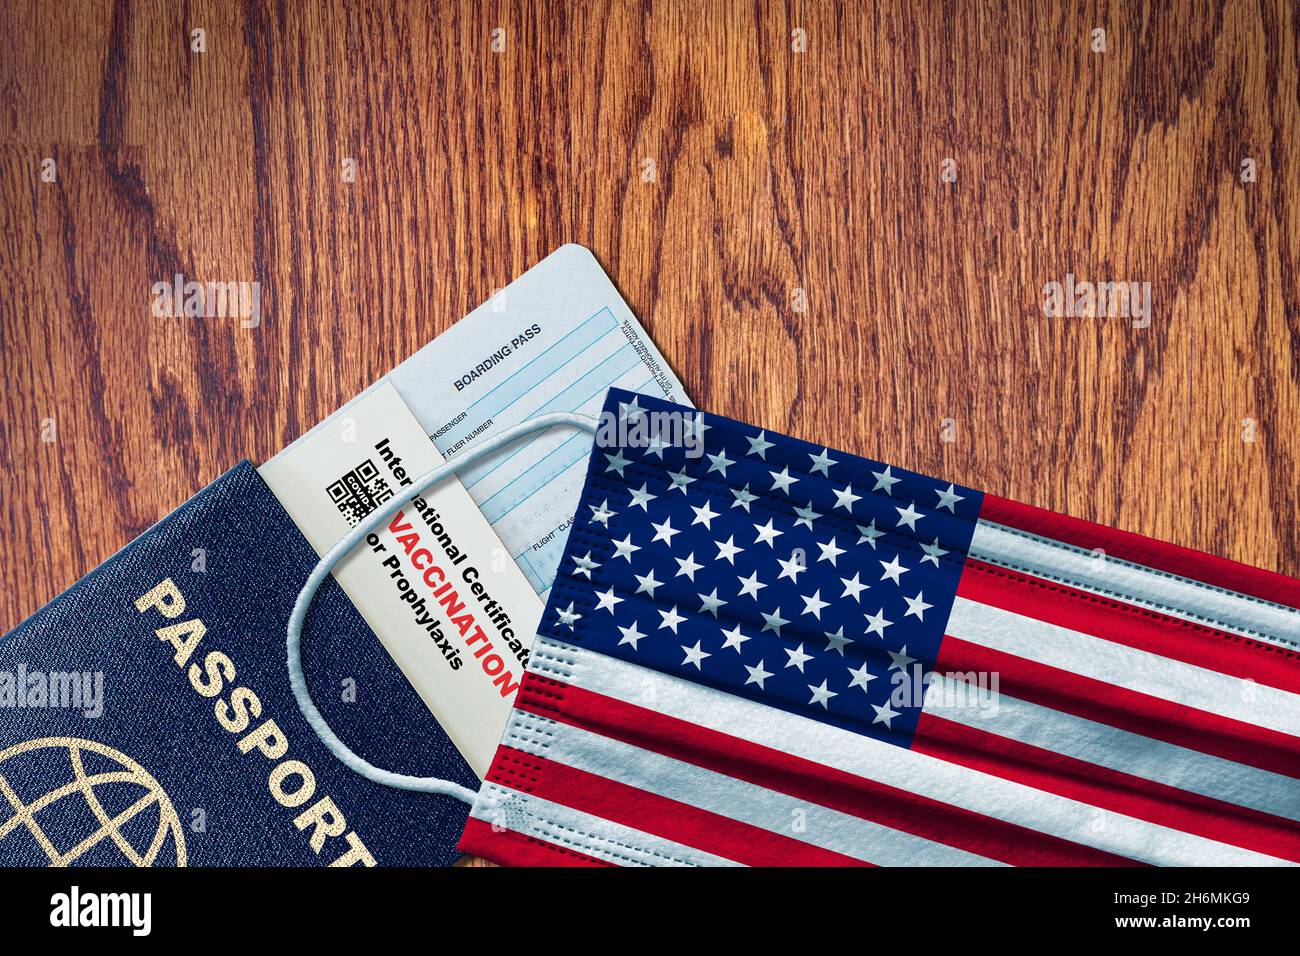 United States new normal travel with passport, boarding pass, face mask with US flag and certificate of COVID-19 vaccination. Vaccine passport concept Stock Photo